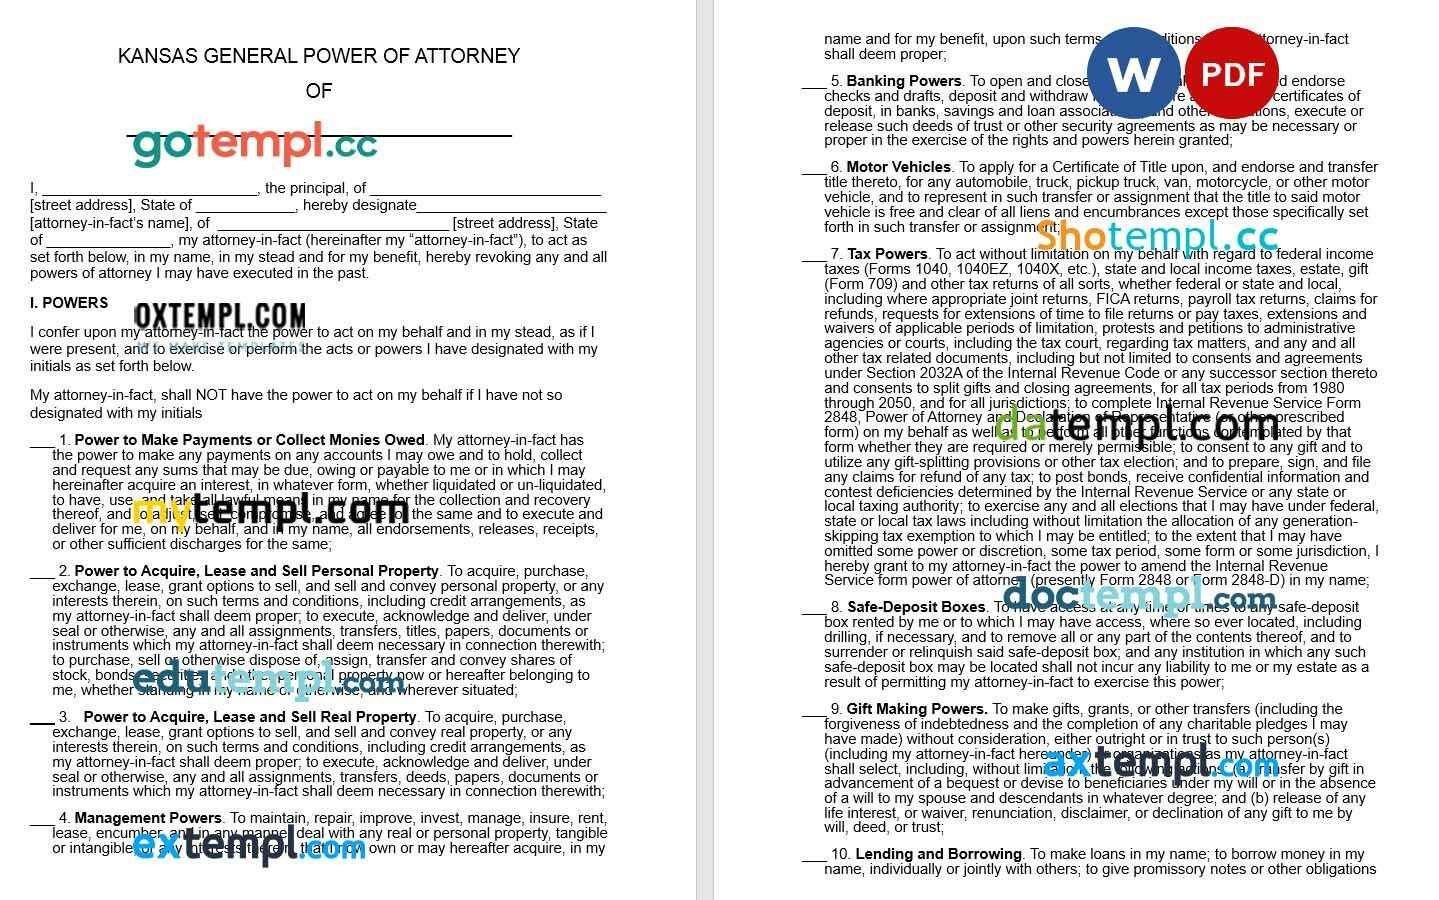 Kansas General Power of Attorney example, fully editable